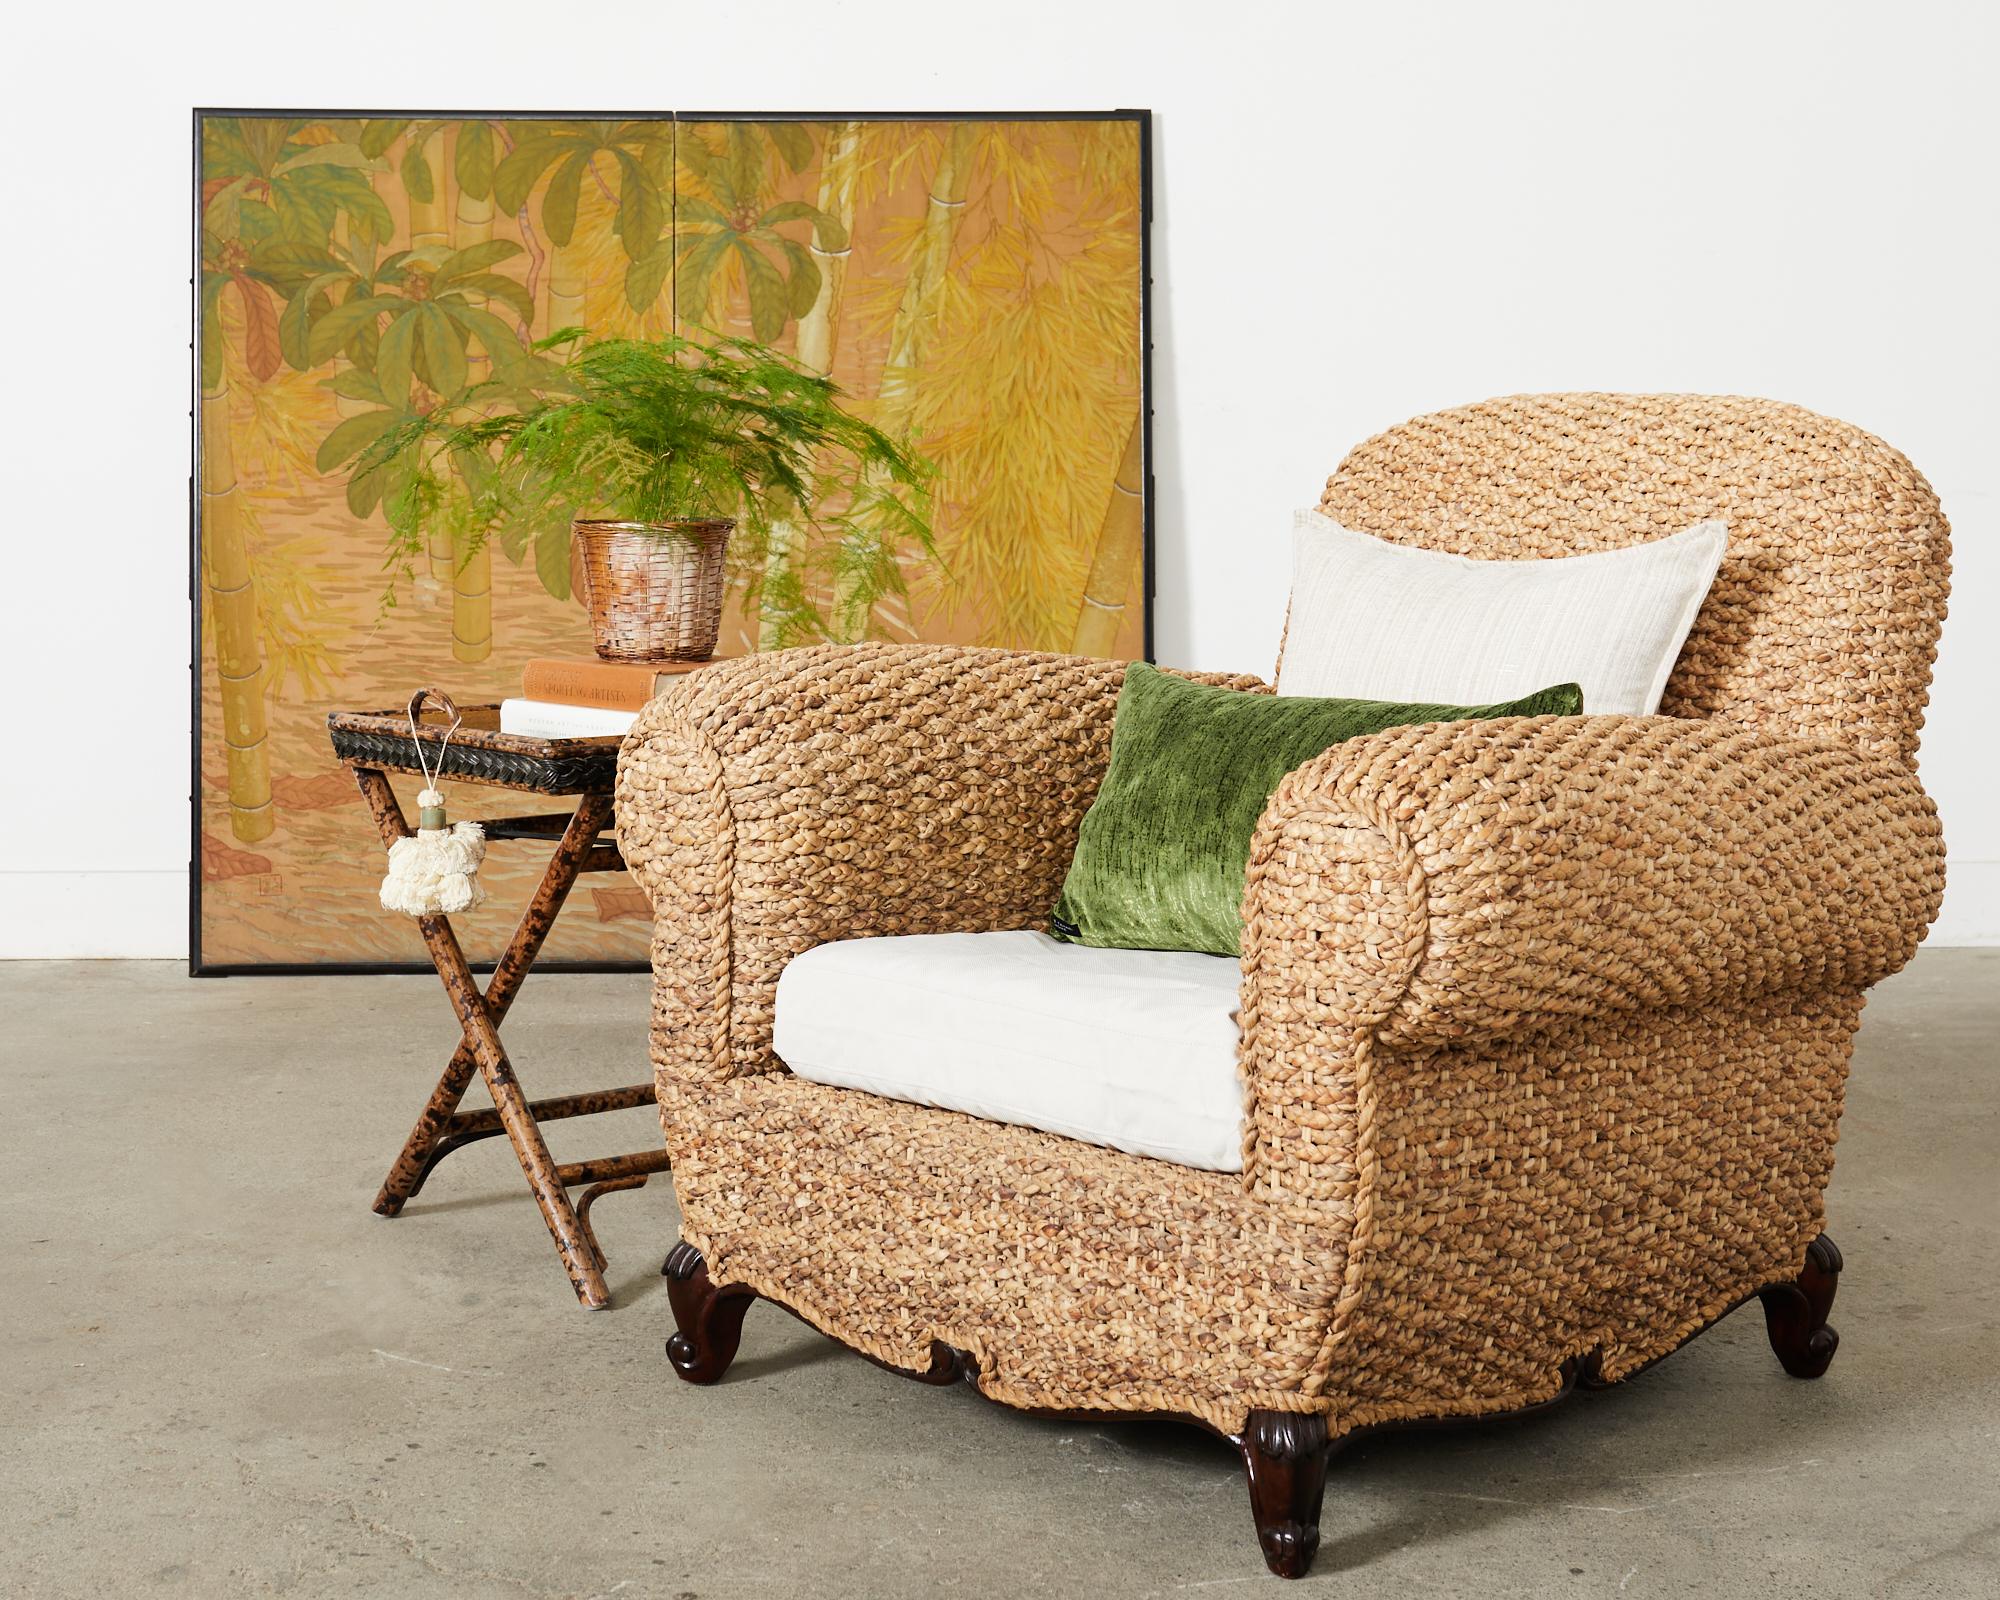 Gorgeous organic modern lounge chair or club chair made in the manner of Louis Quinz by Ralph Lauren. The Victoria Falls club chair is crafted from woven water hyacinth rope or seagrass.. The generous mahogany frame has large rolled arms and is